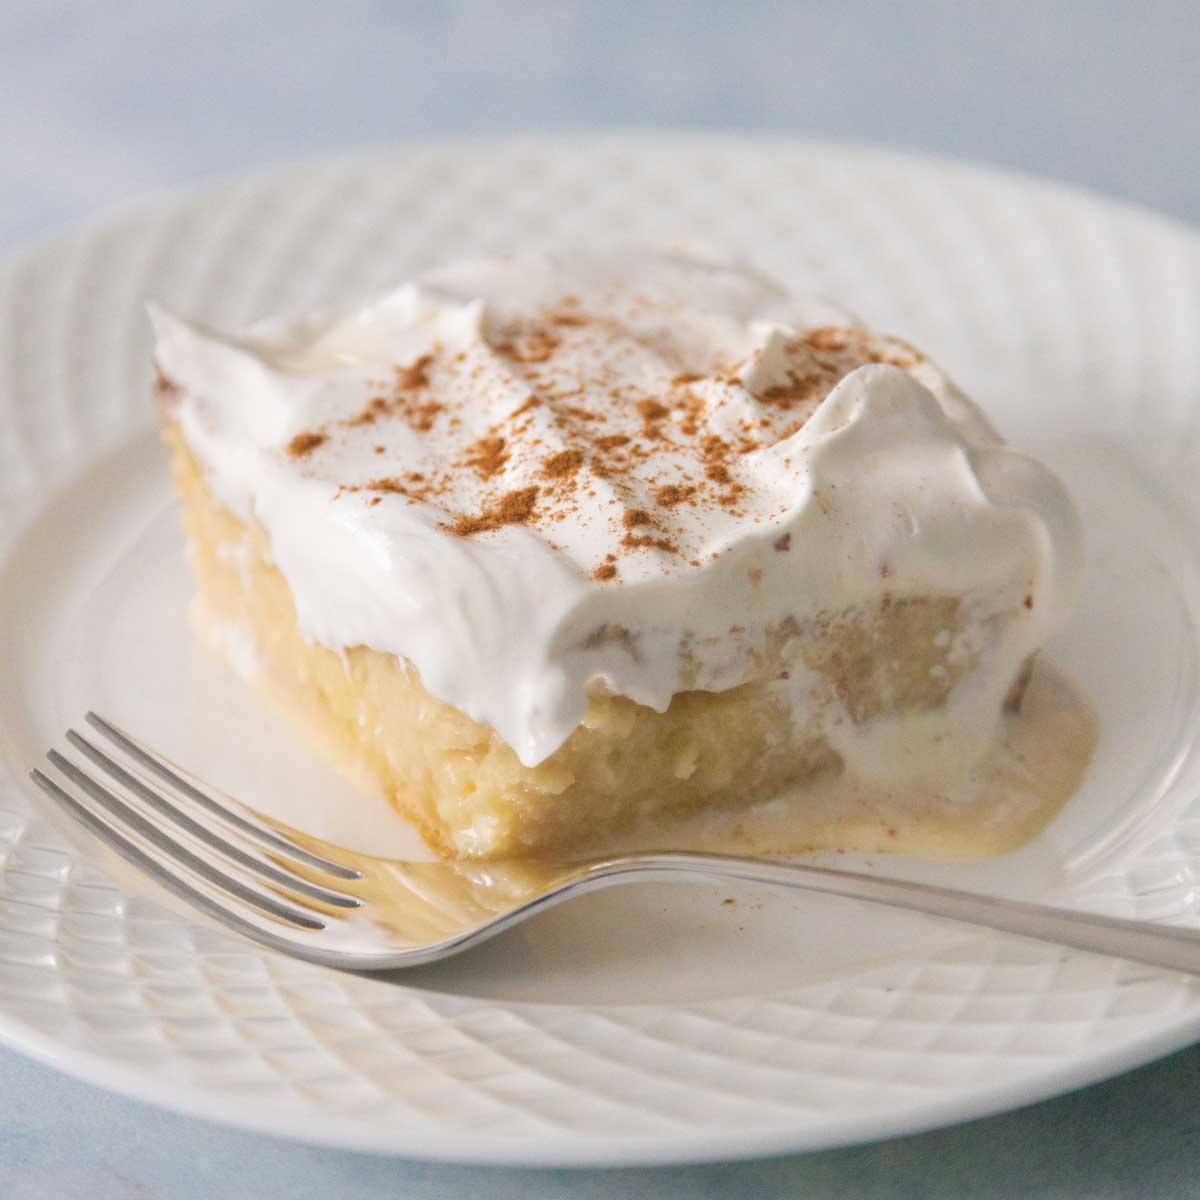 A square slice of tres leches cake is on a plate with a fork. You can see the three milks drizzling down the side of the vanilla cake and cinnamon is sprinkled on top of the whipped cream frosting.